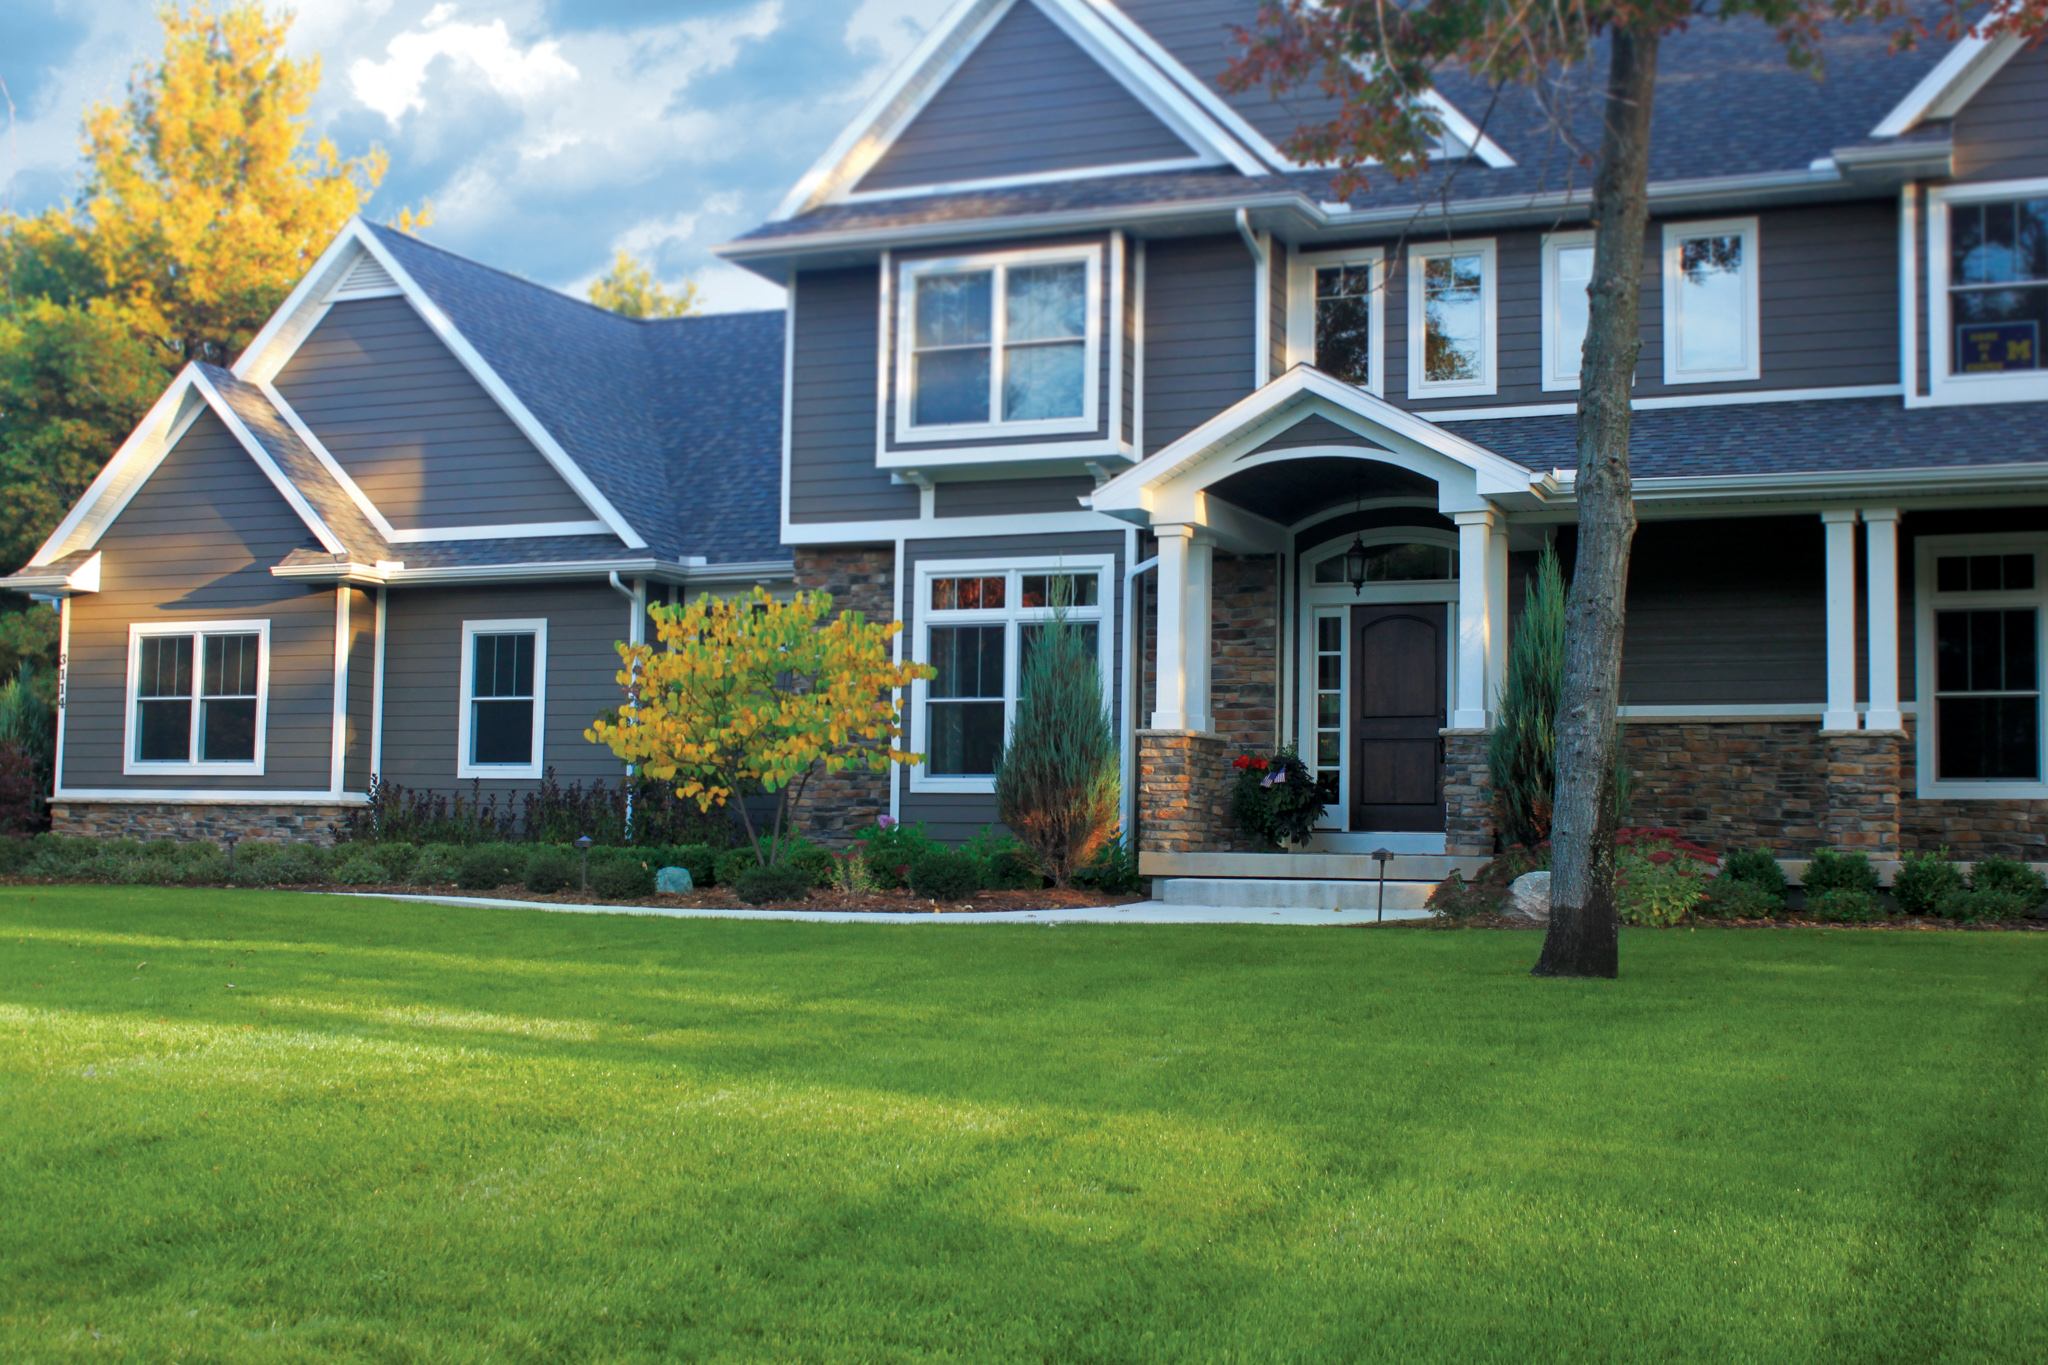 3 Reasons for Dead Patches in Your Lawn